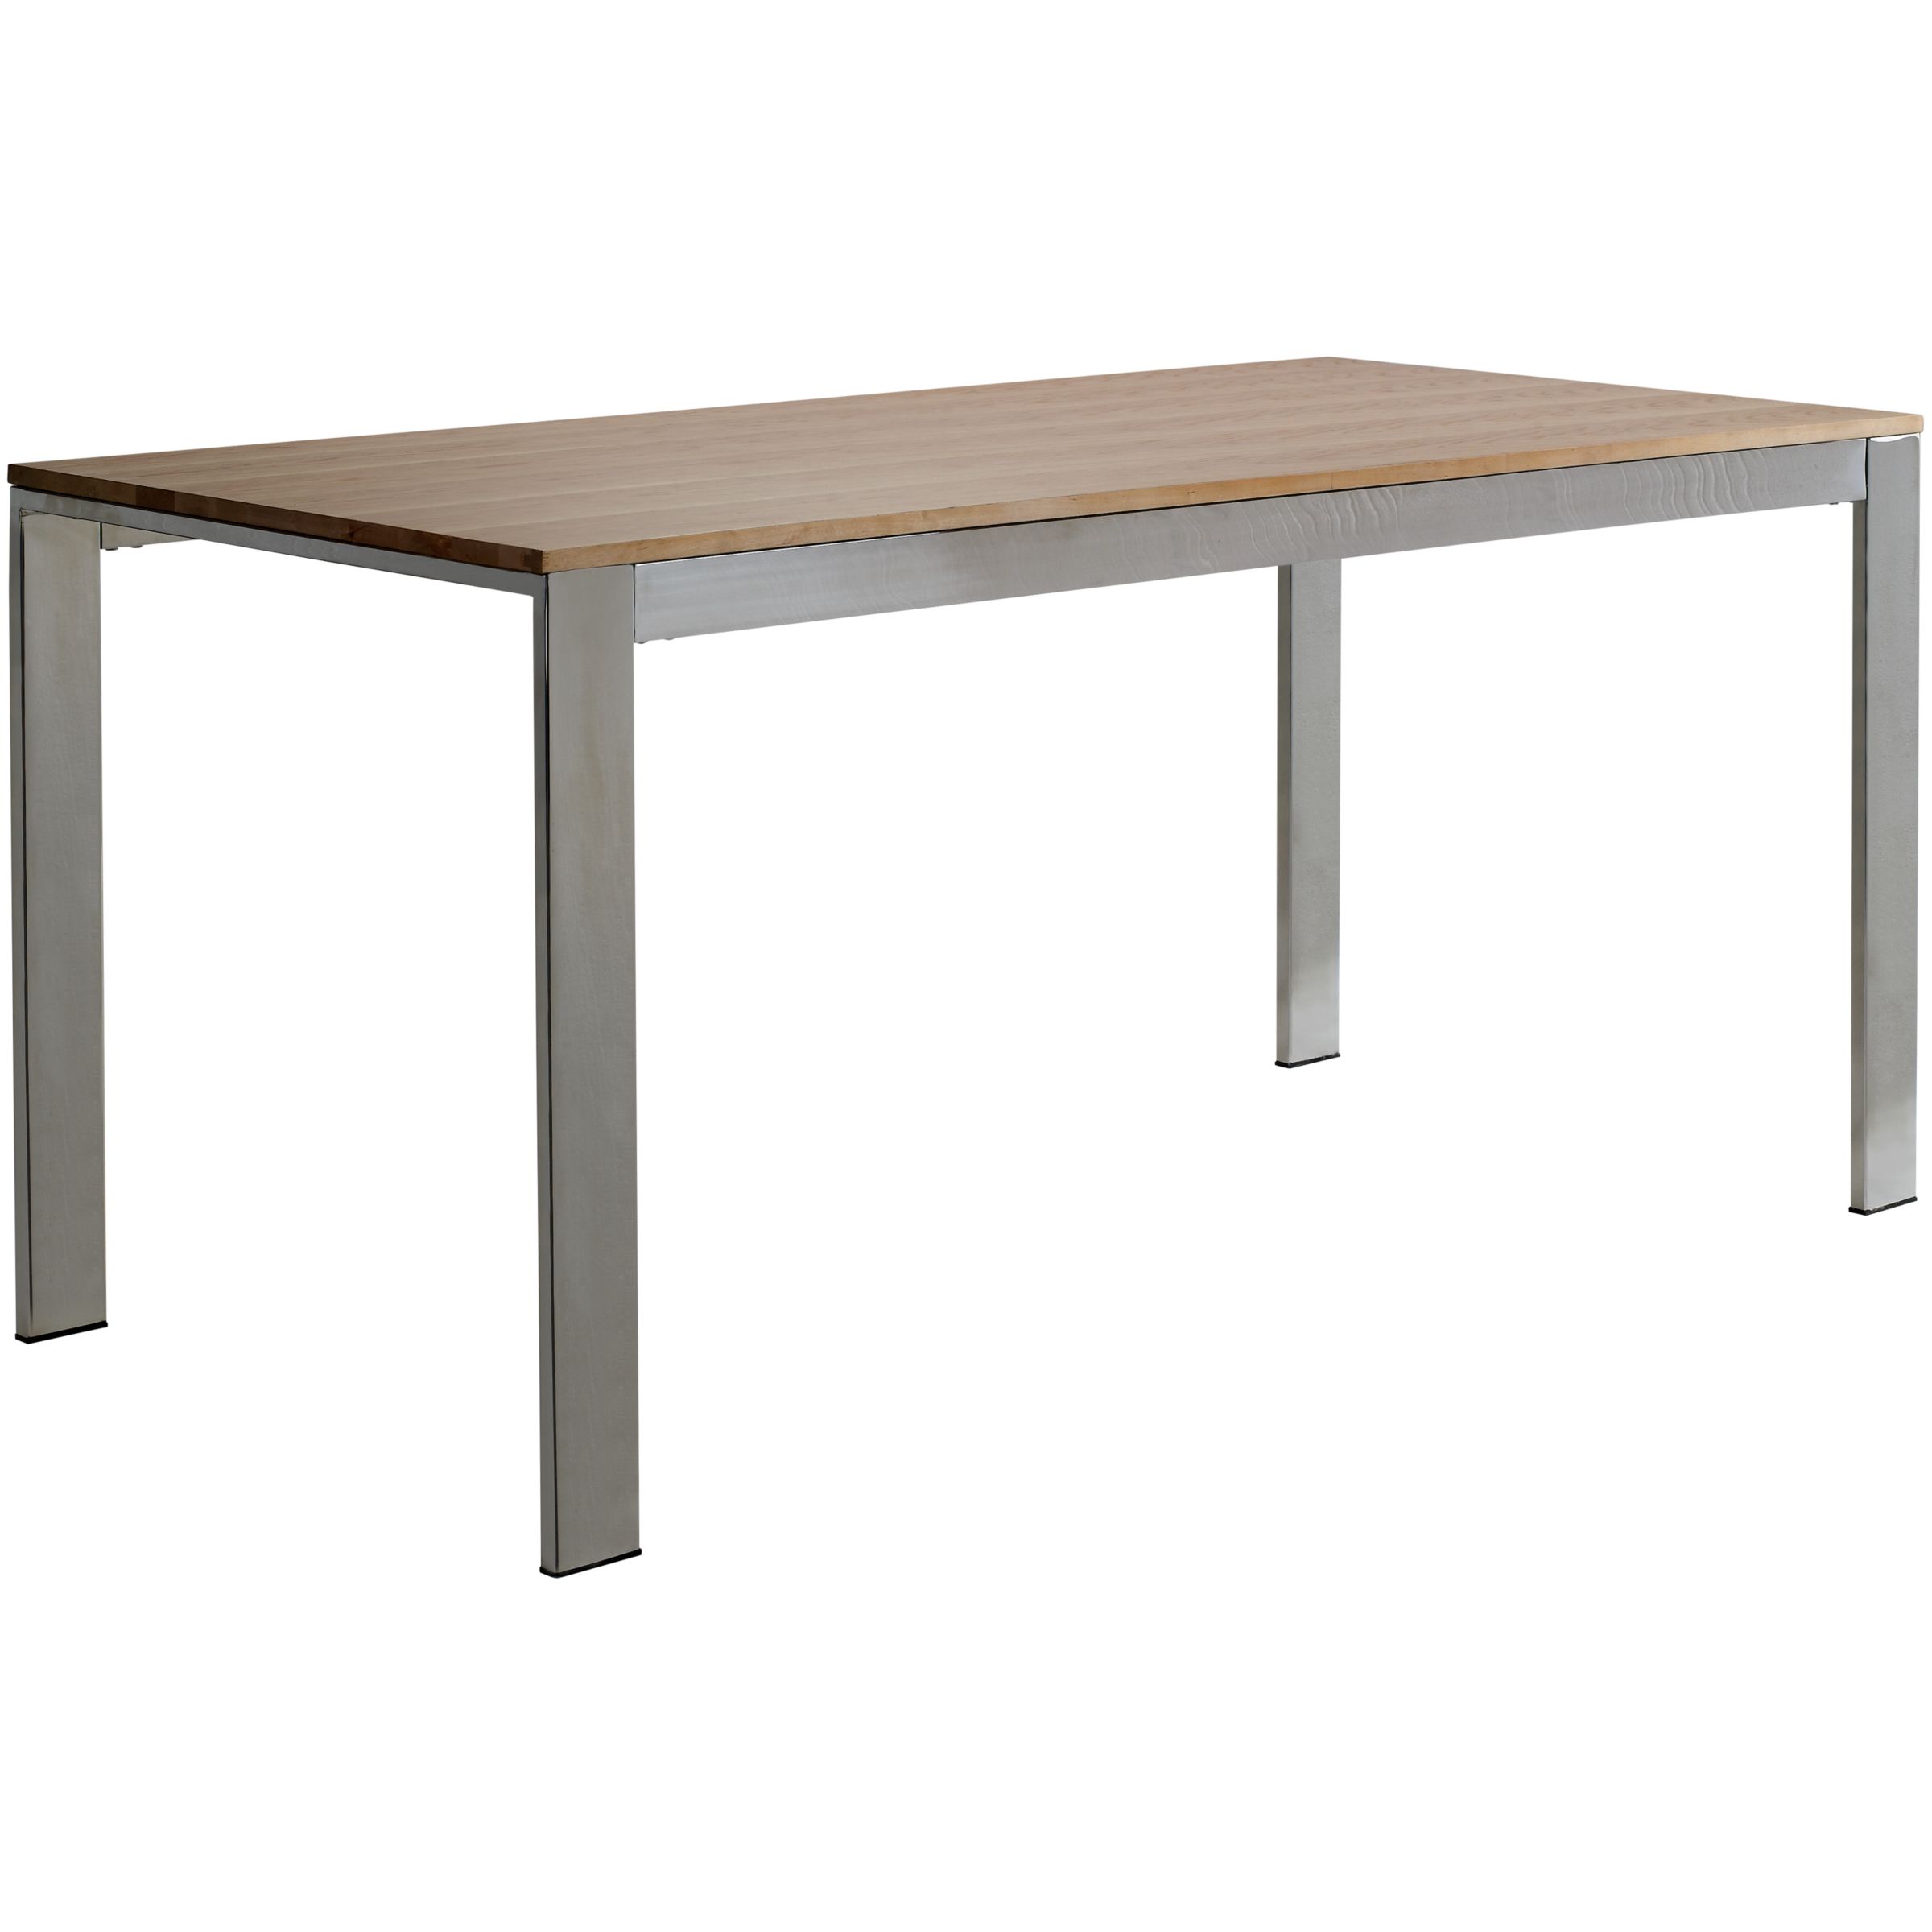 John Lewis Frost Small Dining Table, Oak